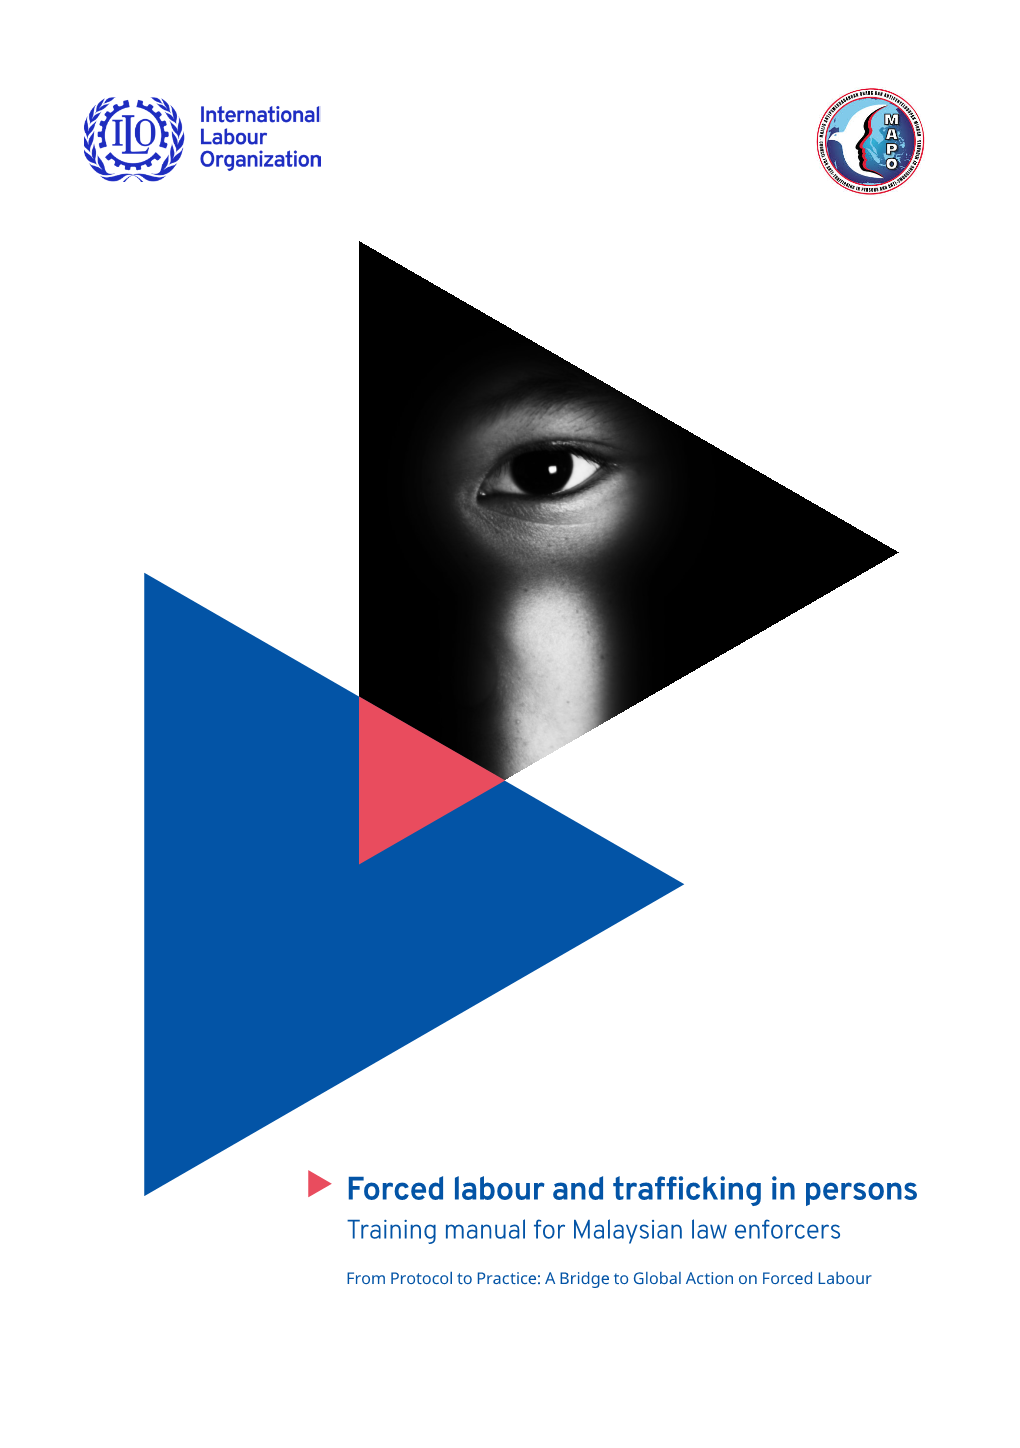 Forced Labour and Trafficking in Persons Training Manual for Malaysian Law Enforcers